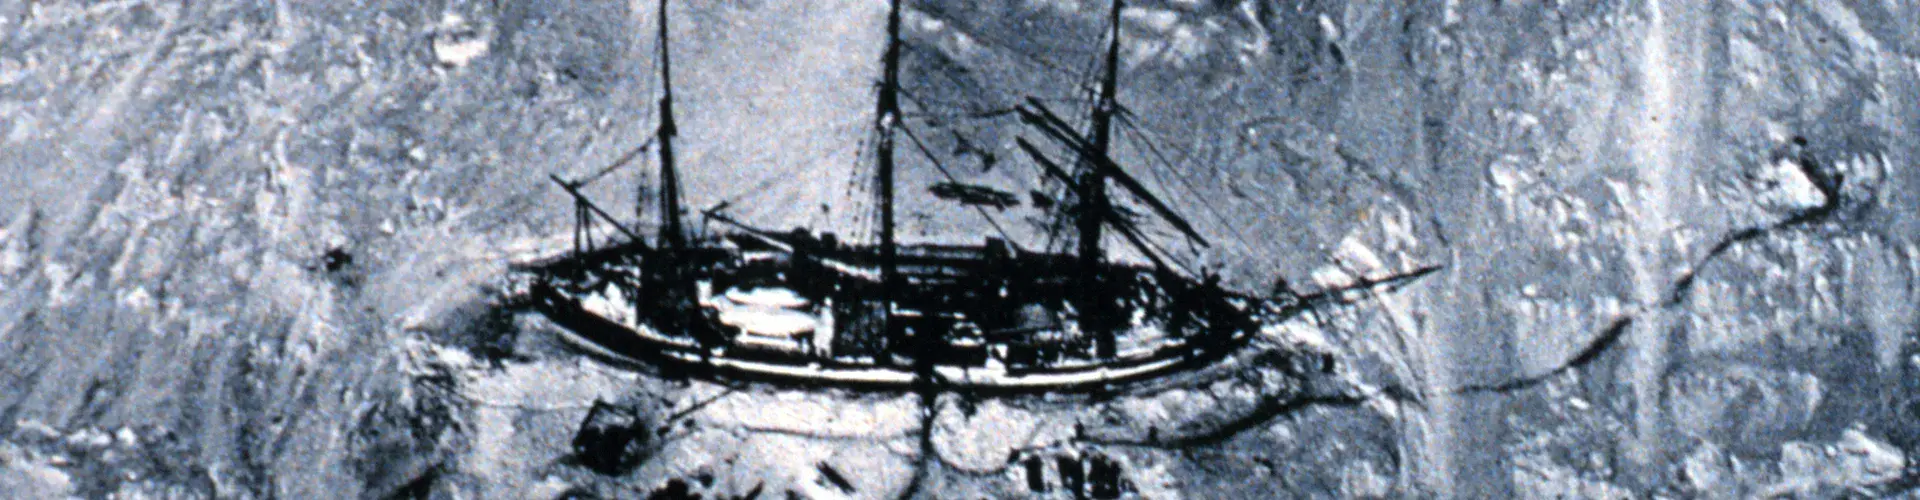 One of the first aerial photographs of the Antarctic, this picture was obtained from a balloon in 1901. It shows the ship of German explorer Erich von Drygalski’s, the log books of which were used in the study. (Credit: National Oceanic and Atmospheric Administration/Department of Commerce)